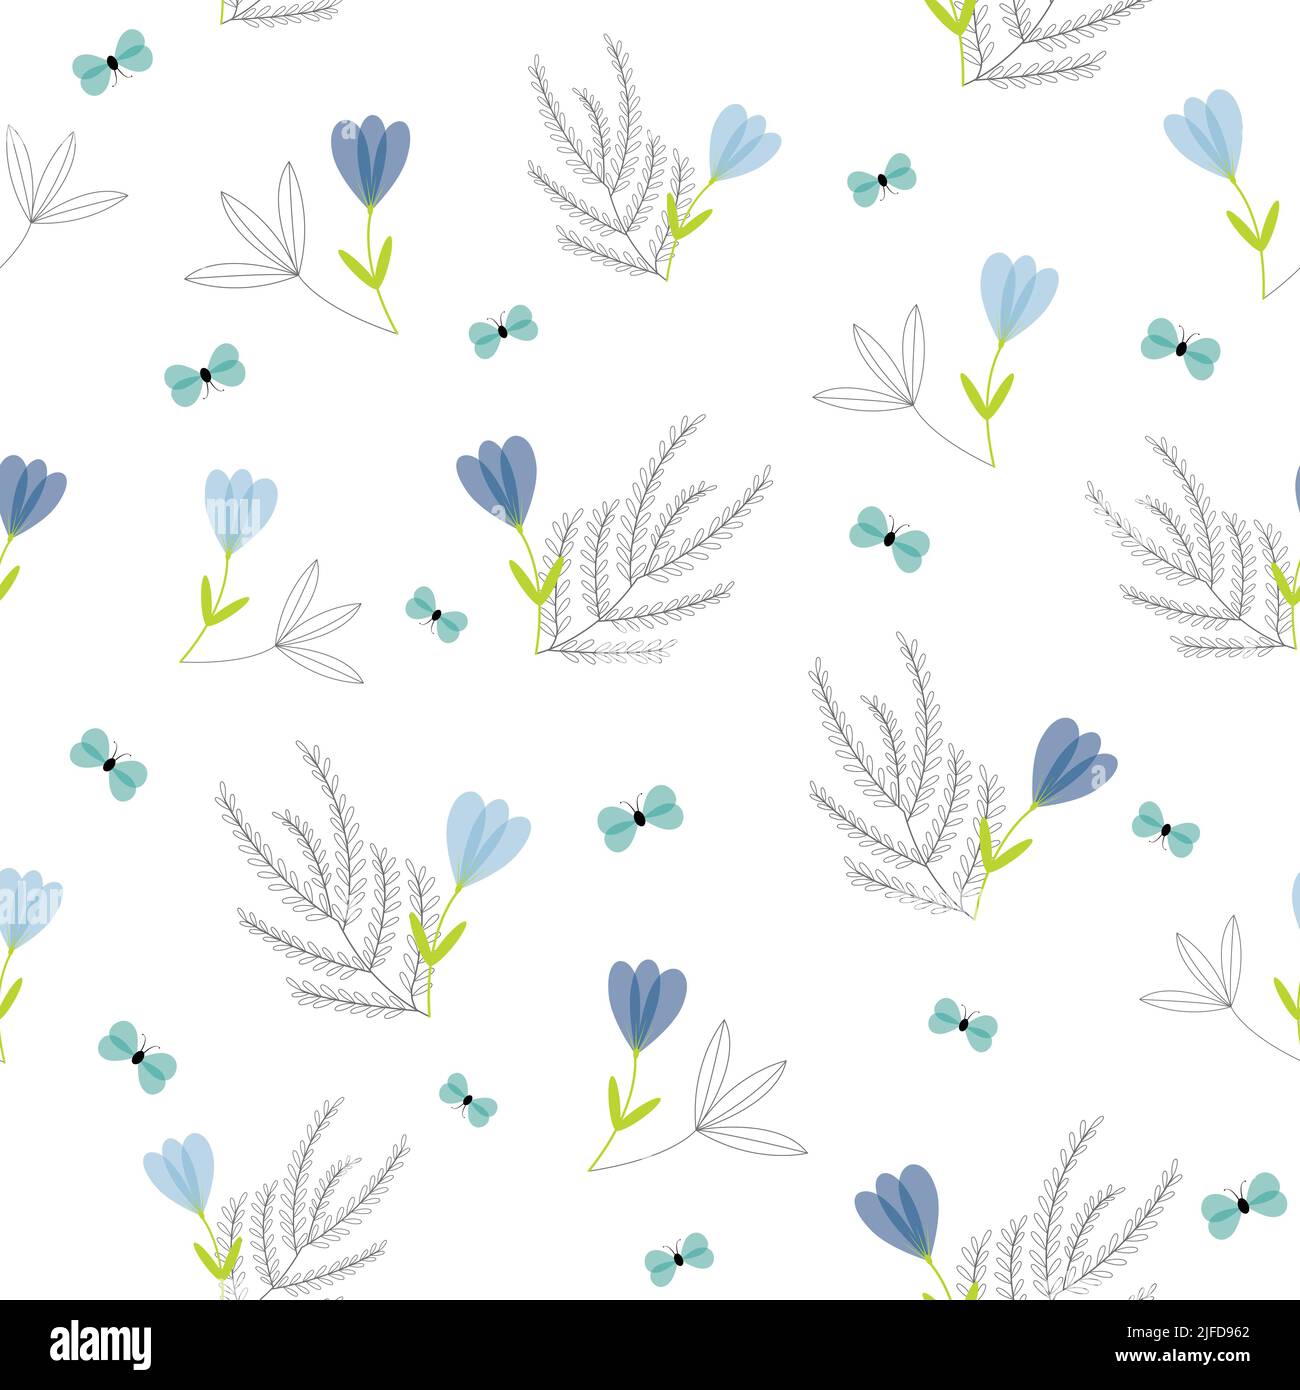 Vector blue floral garden with shrubs and butterflies. Cute seamless repeat pattern background. Elegant hand drawn illustration. Stock Vector